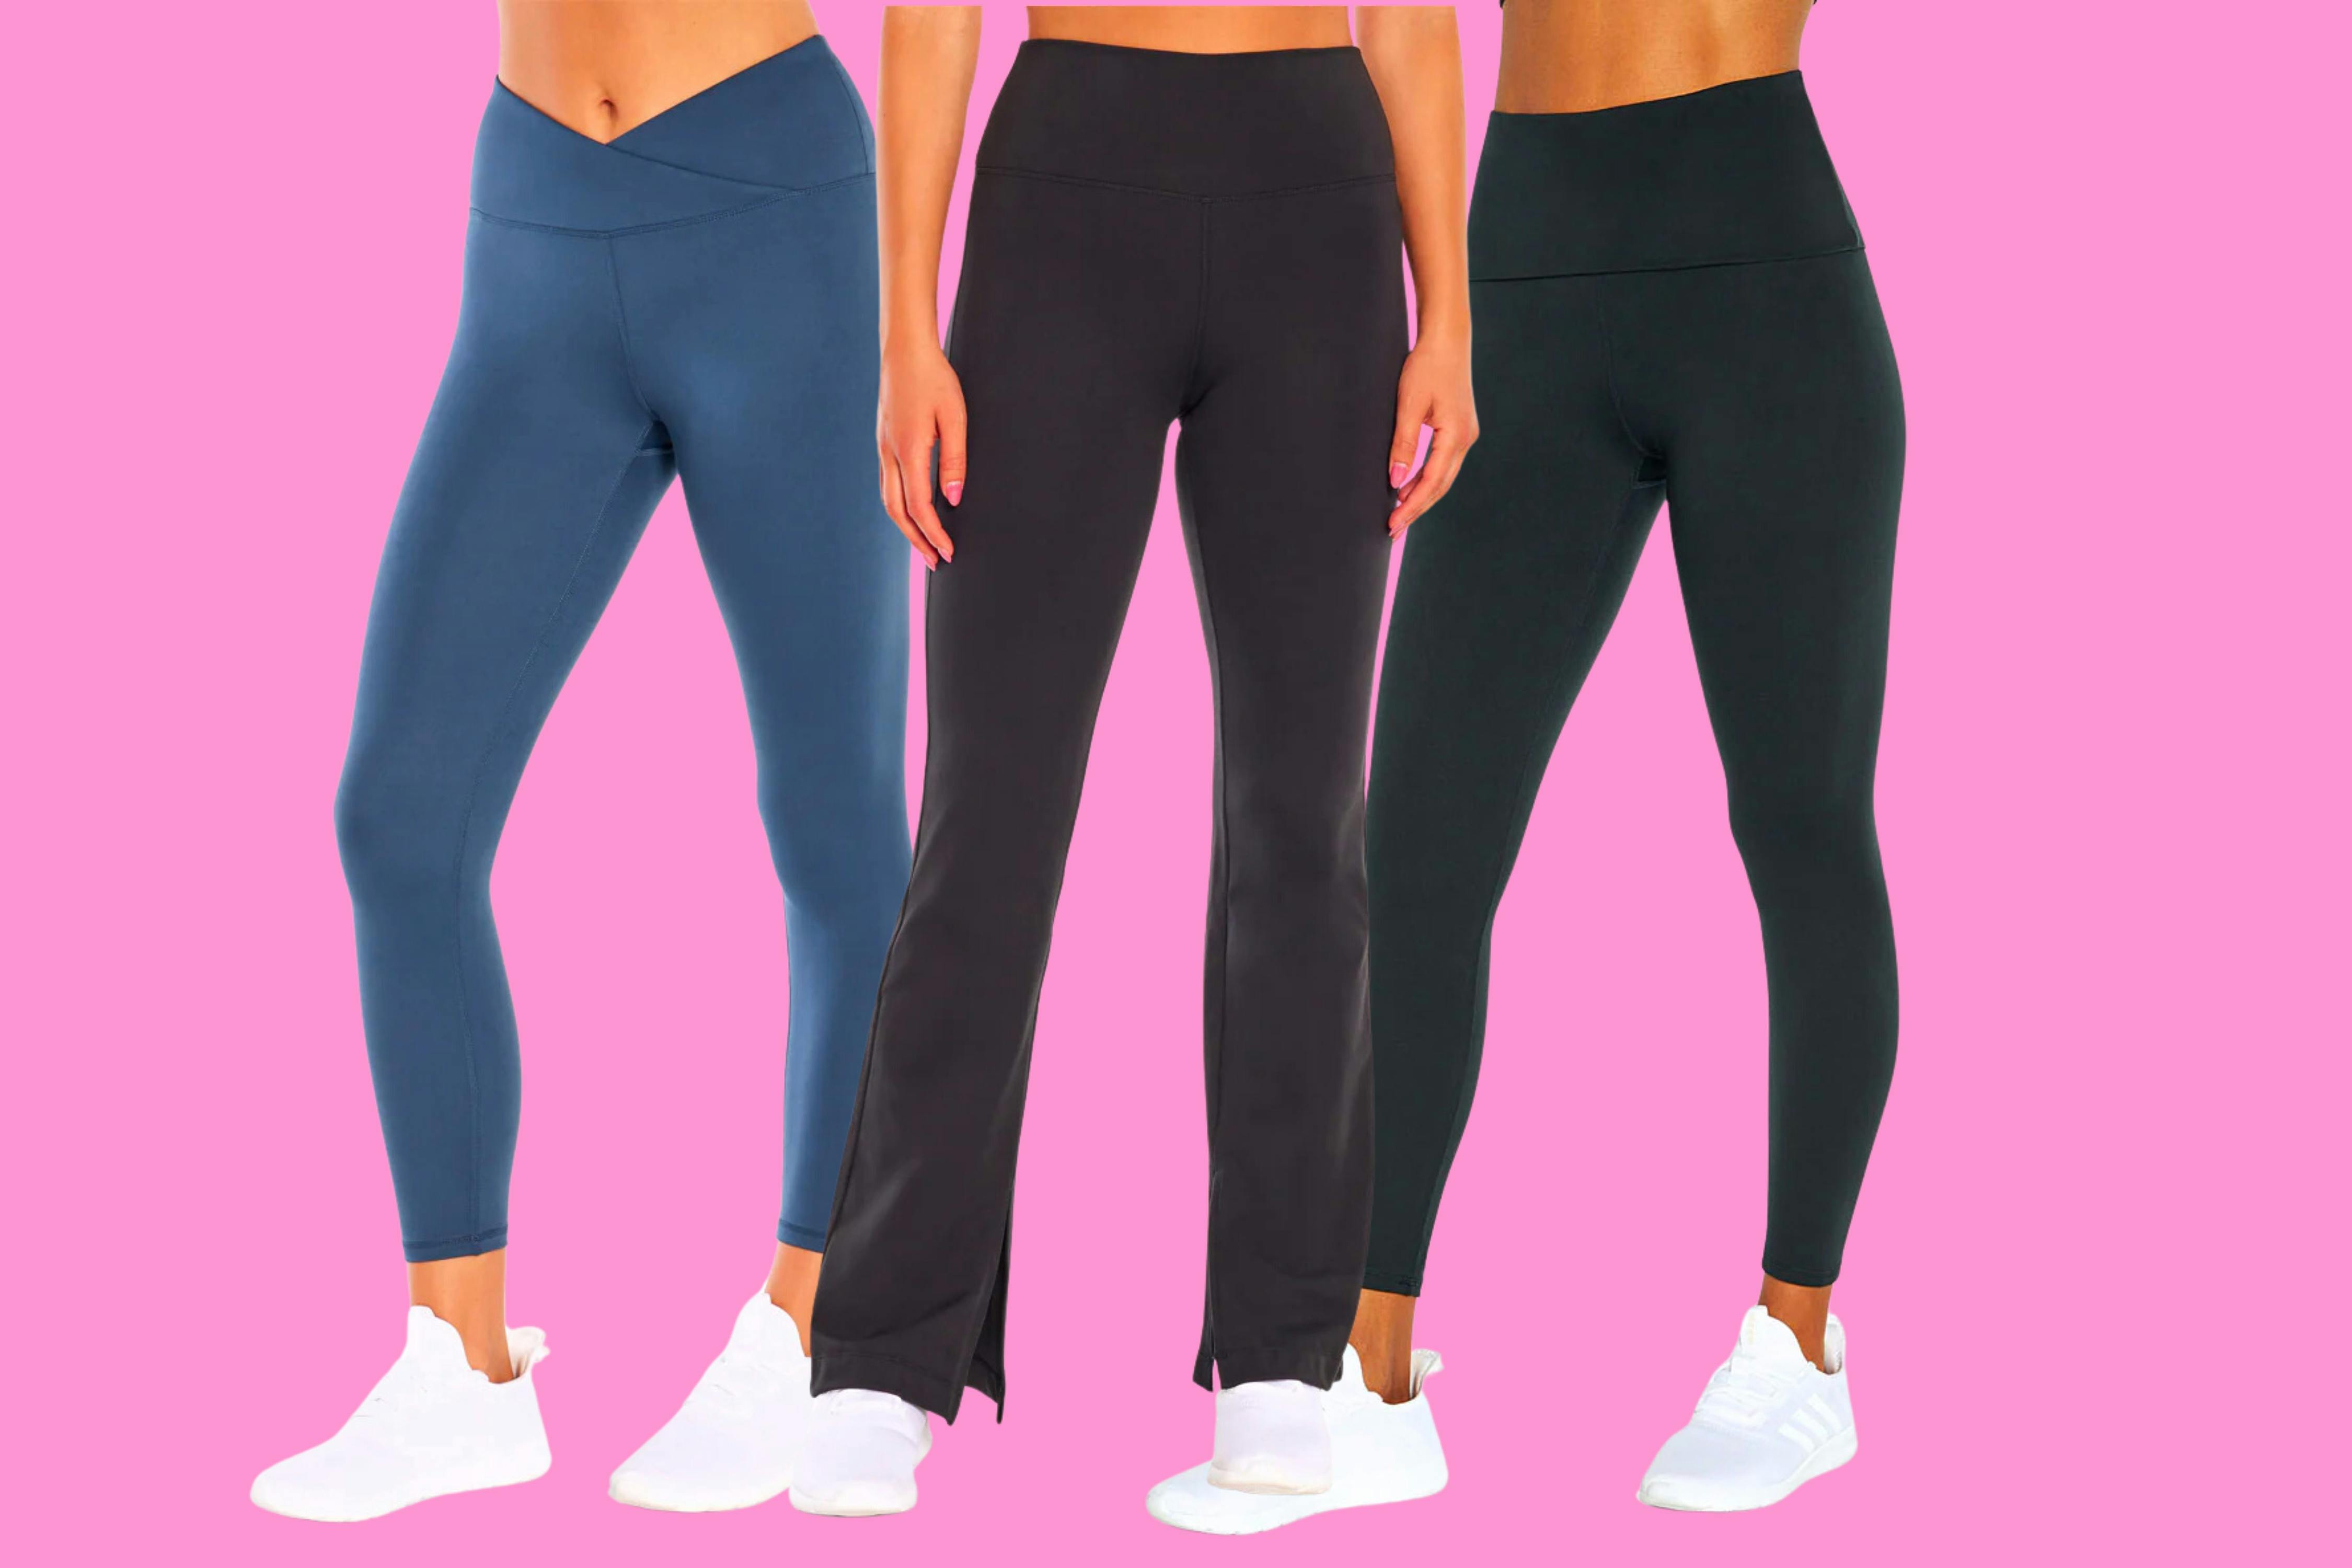 Balance Athletic Wear, Starting at $13 at Zulily - The Krazy Coupon Lady